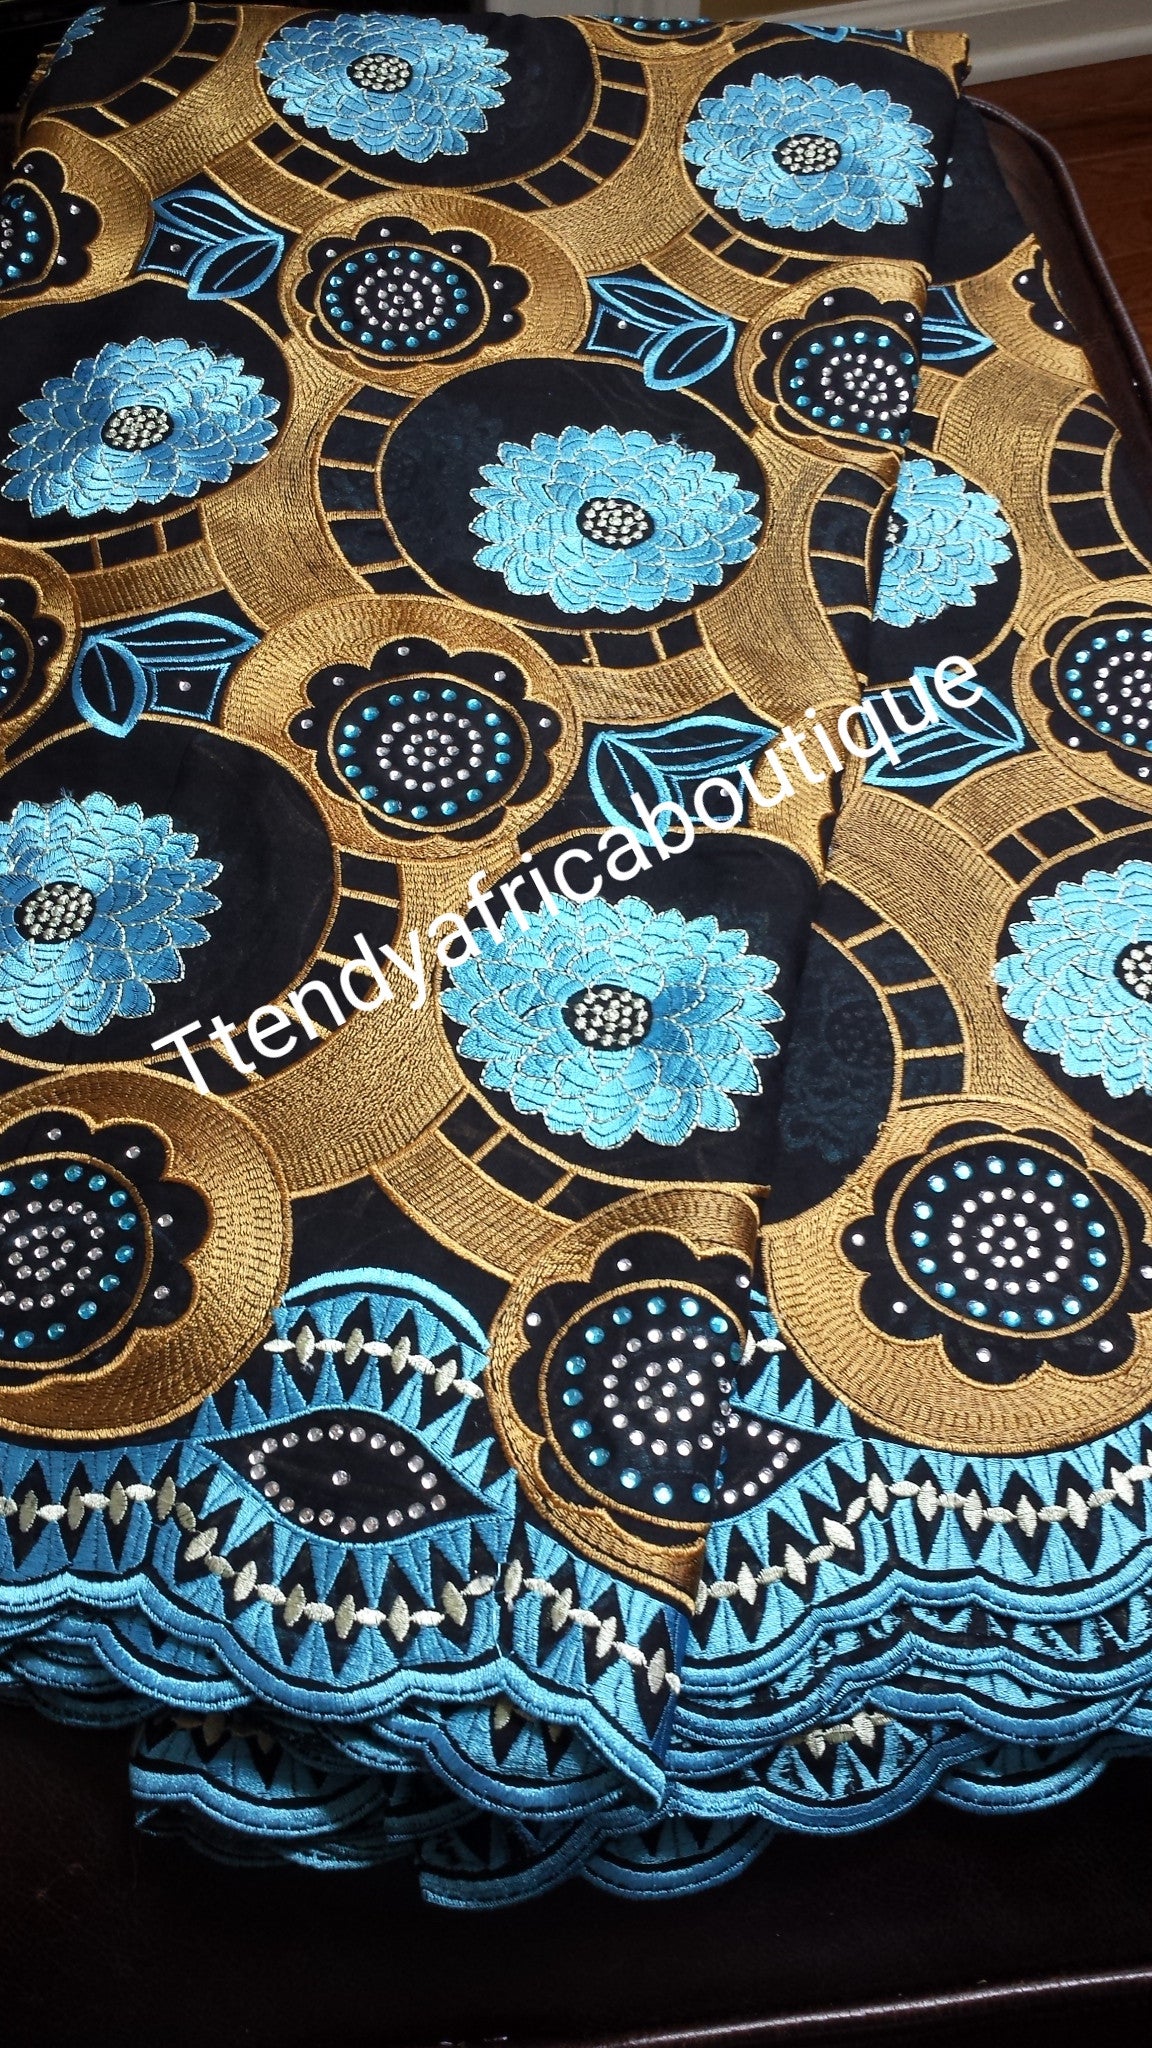 Sale: Black/Gold/Turquoise blue Swiss voile lace fabric ...